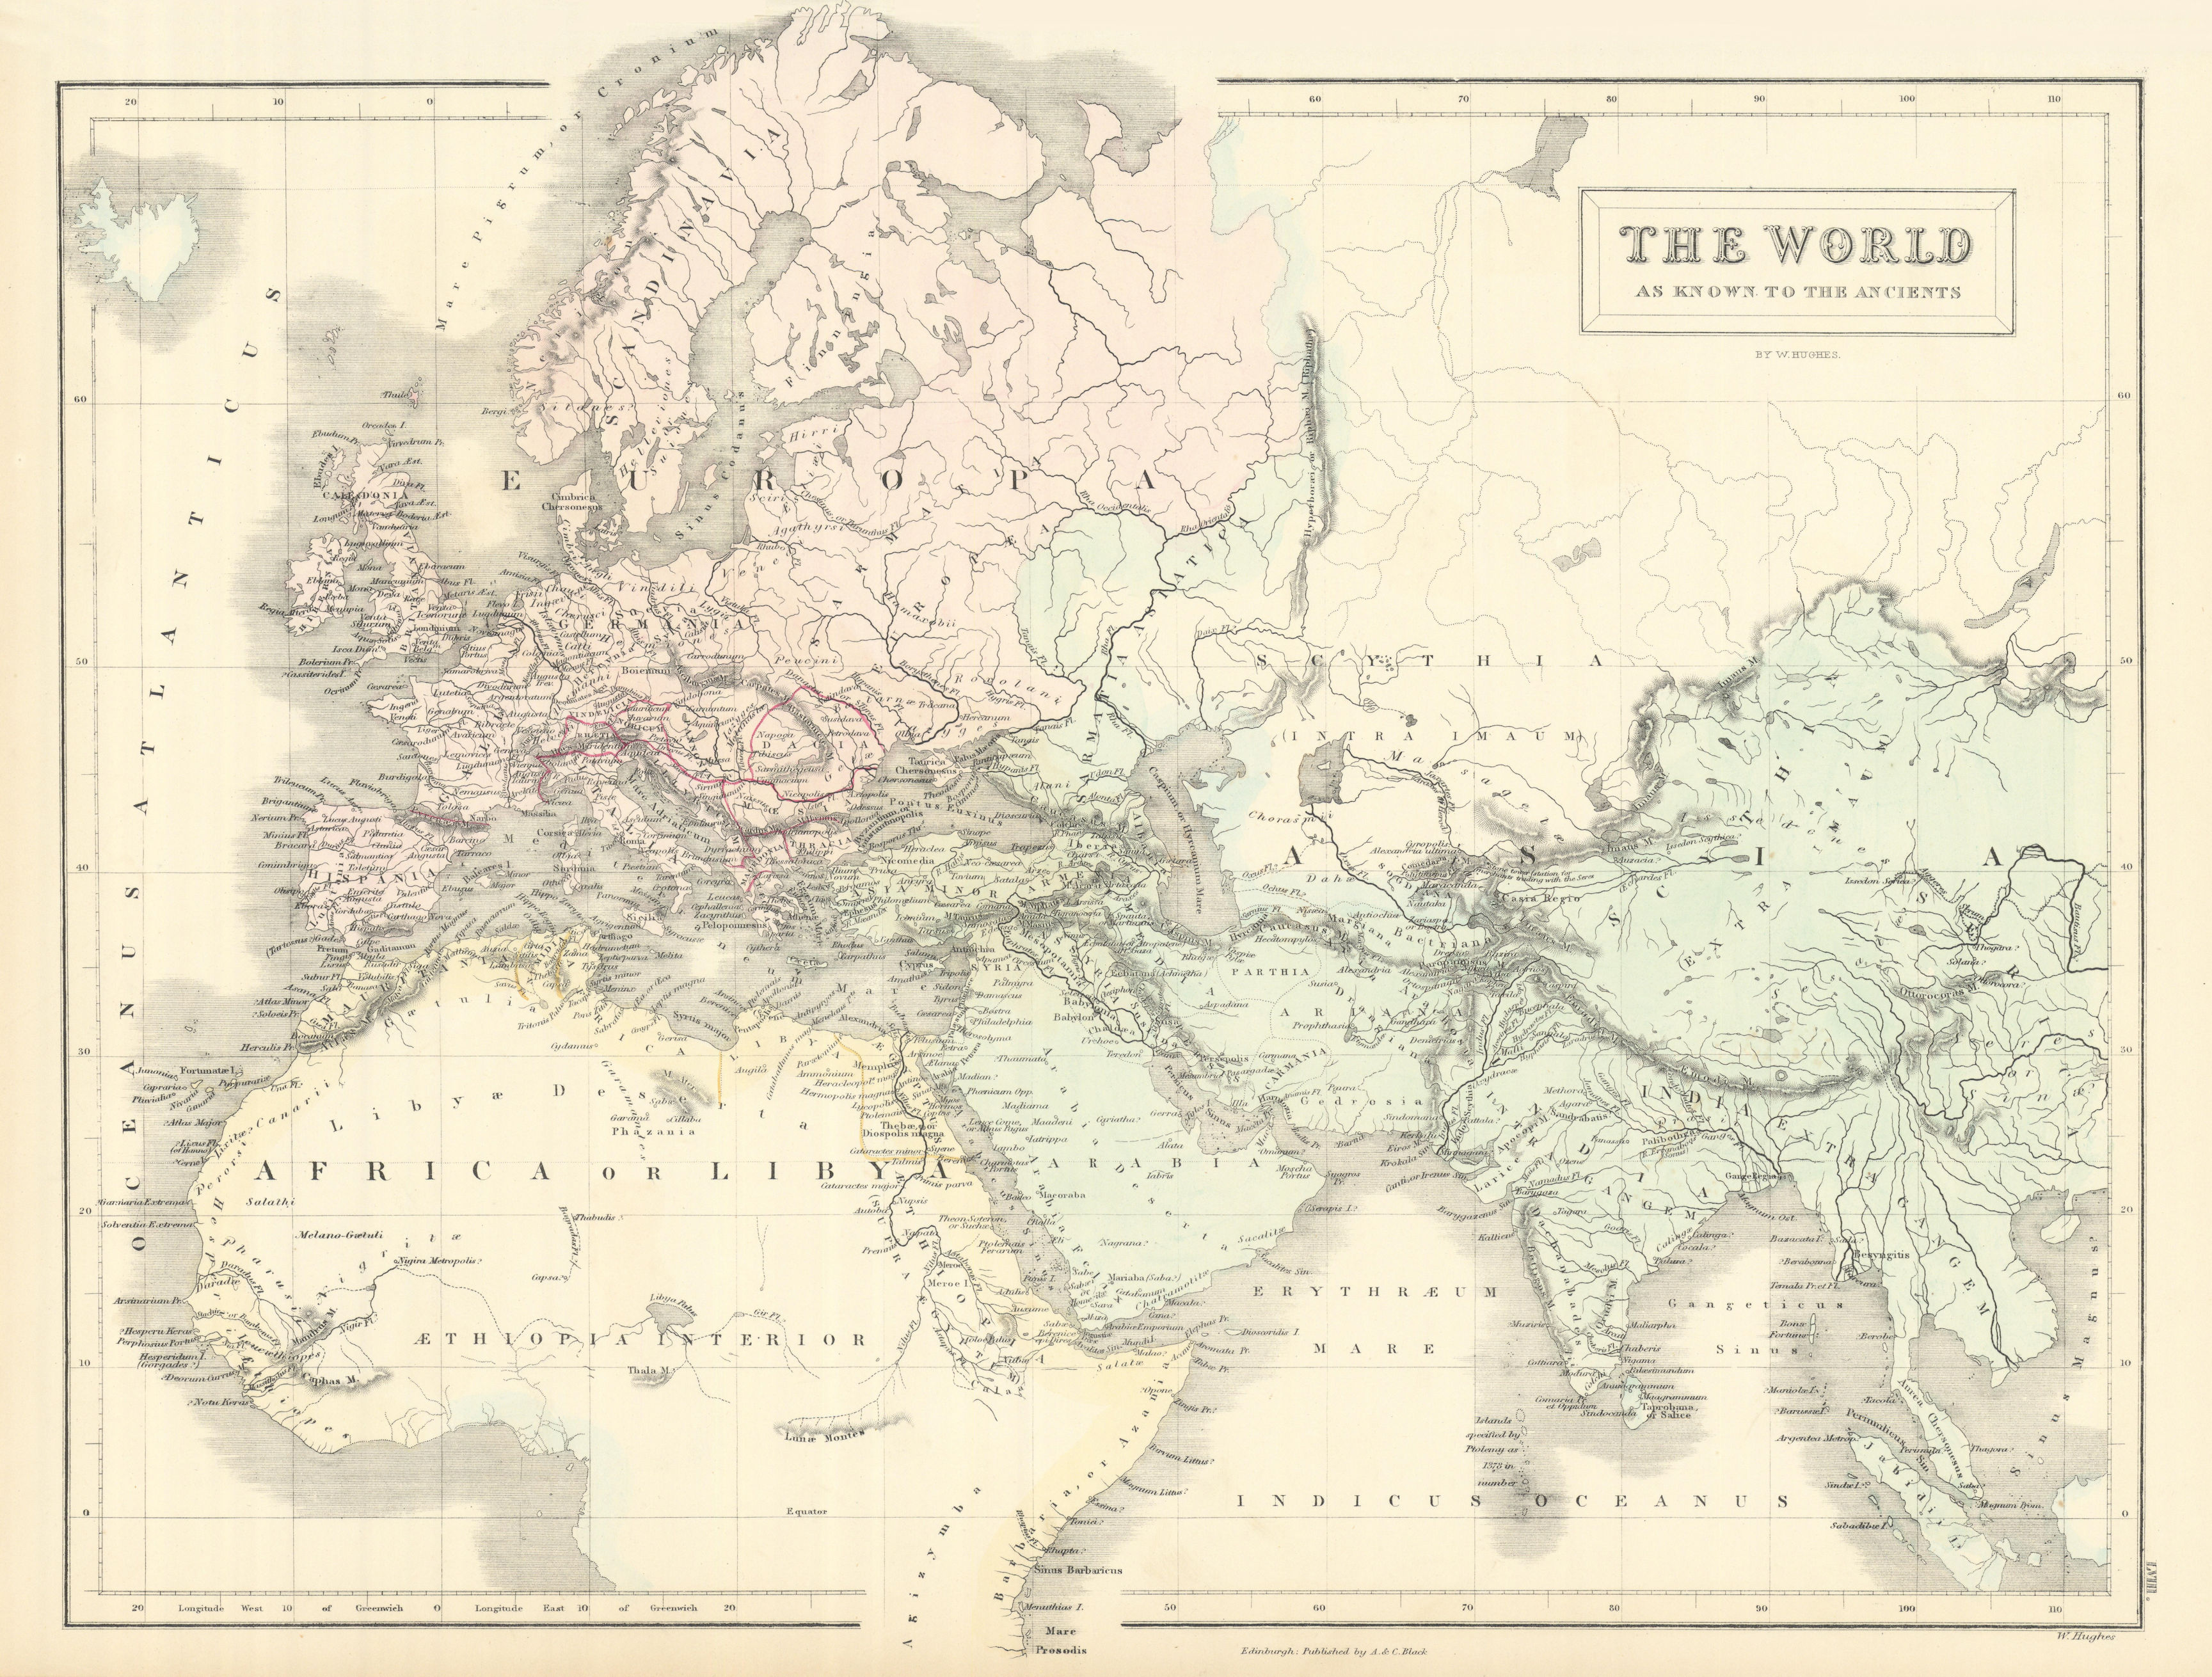 Associate Product The World as known to the Ancients, by WILLIAM HUGHES 1854 old antique map